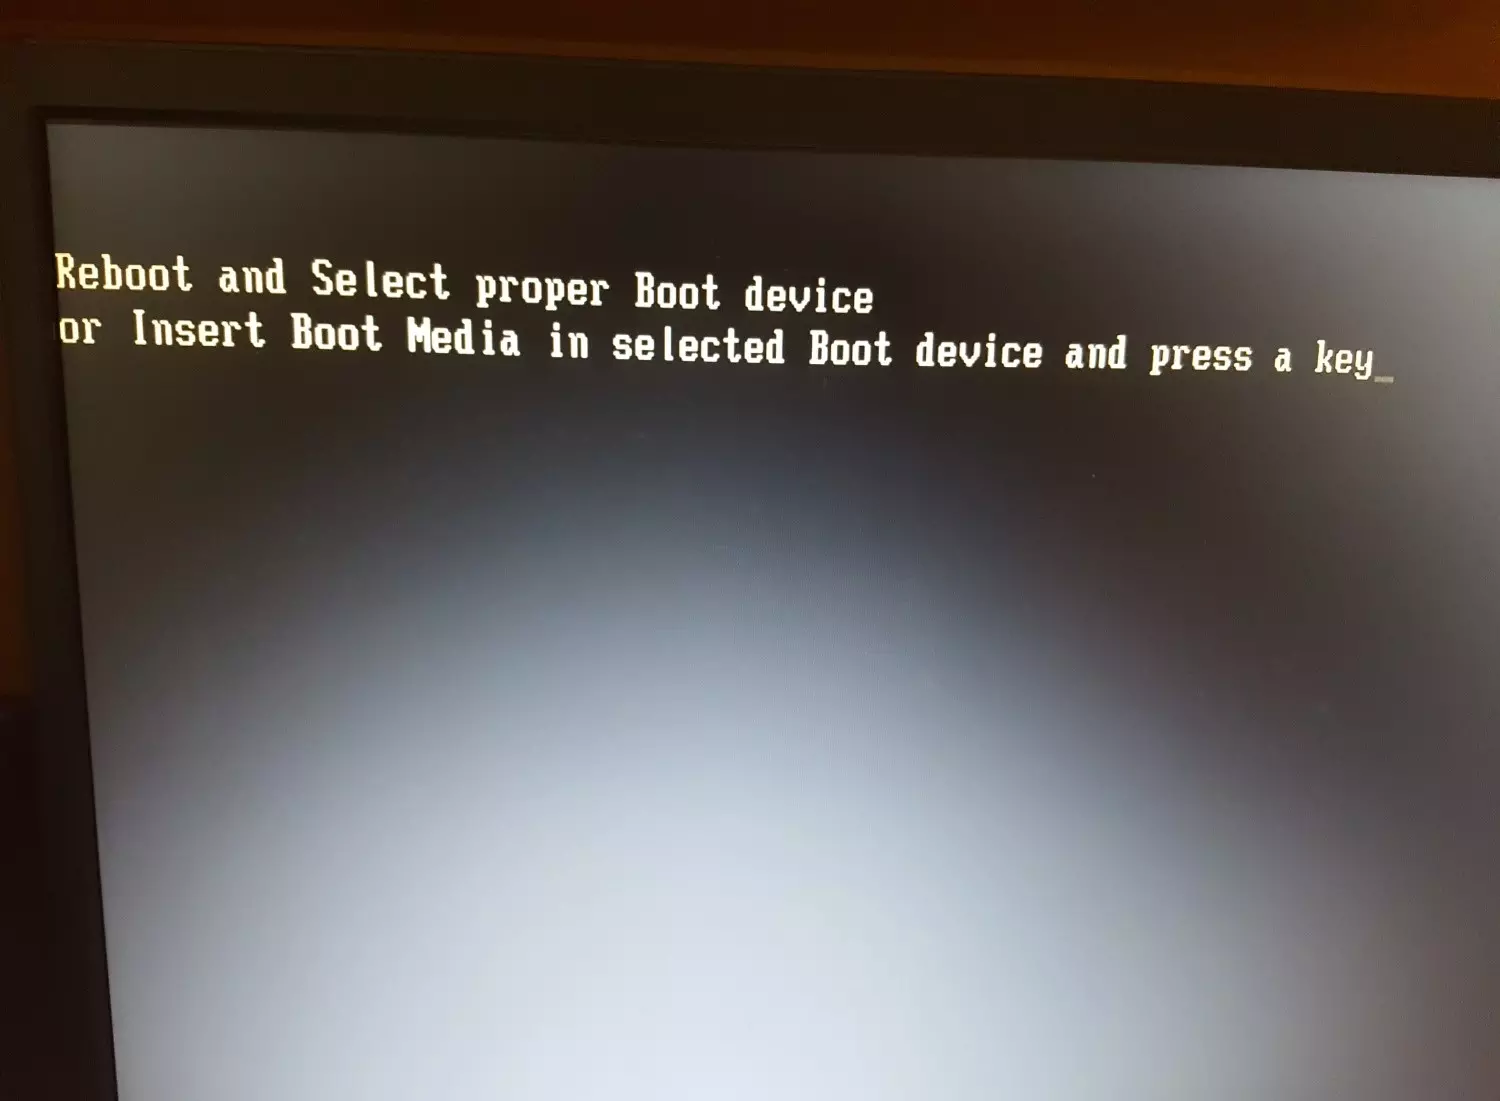 Reboot and select proper Boot device. Ошибка Reboot and select proper Boot device or Insert. Ошибка Reboot and select proper Boot device. Reboot and select proper Boot device and Press a Key. Press to reboot